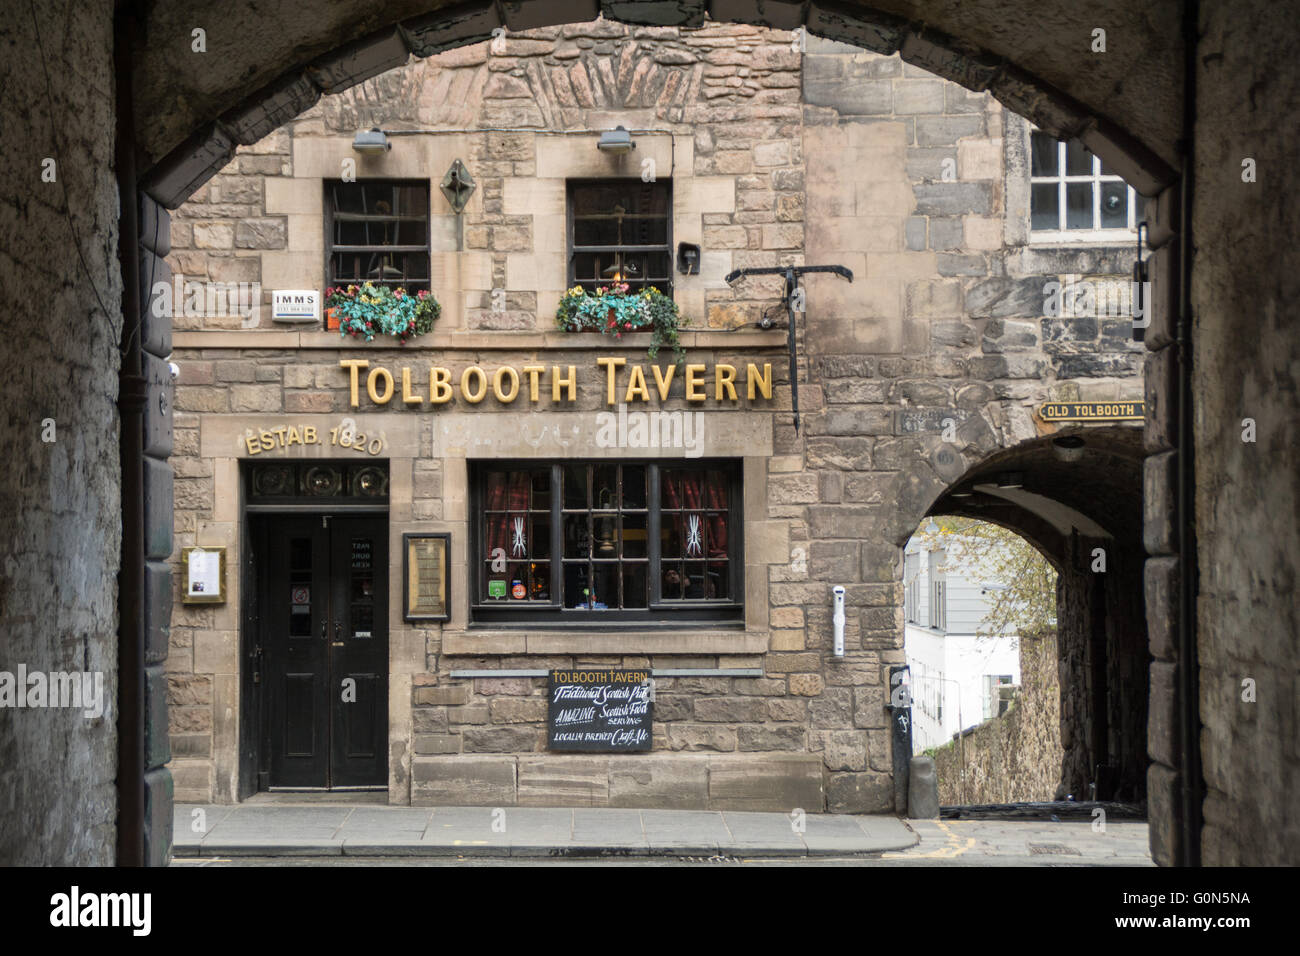 EDINBURGH, SCOTLAND - May 2nd 2016: The historic Tolbooth Tavern situated along Canongate on the Royal Mile Stock Photo